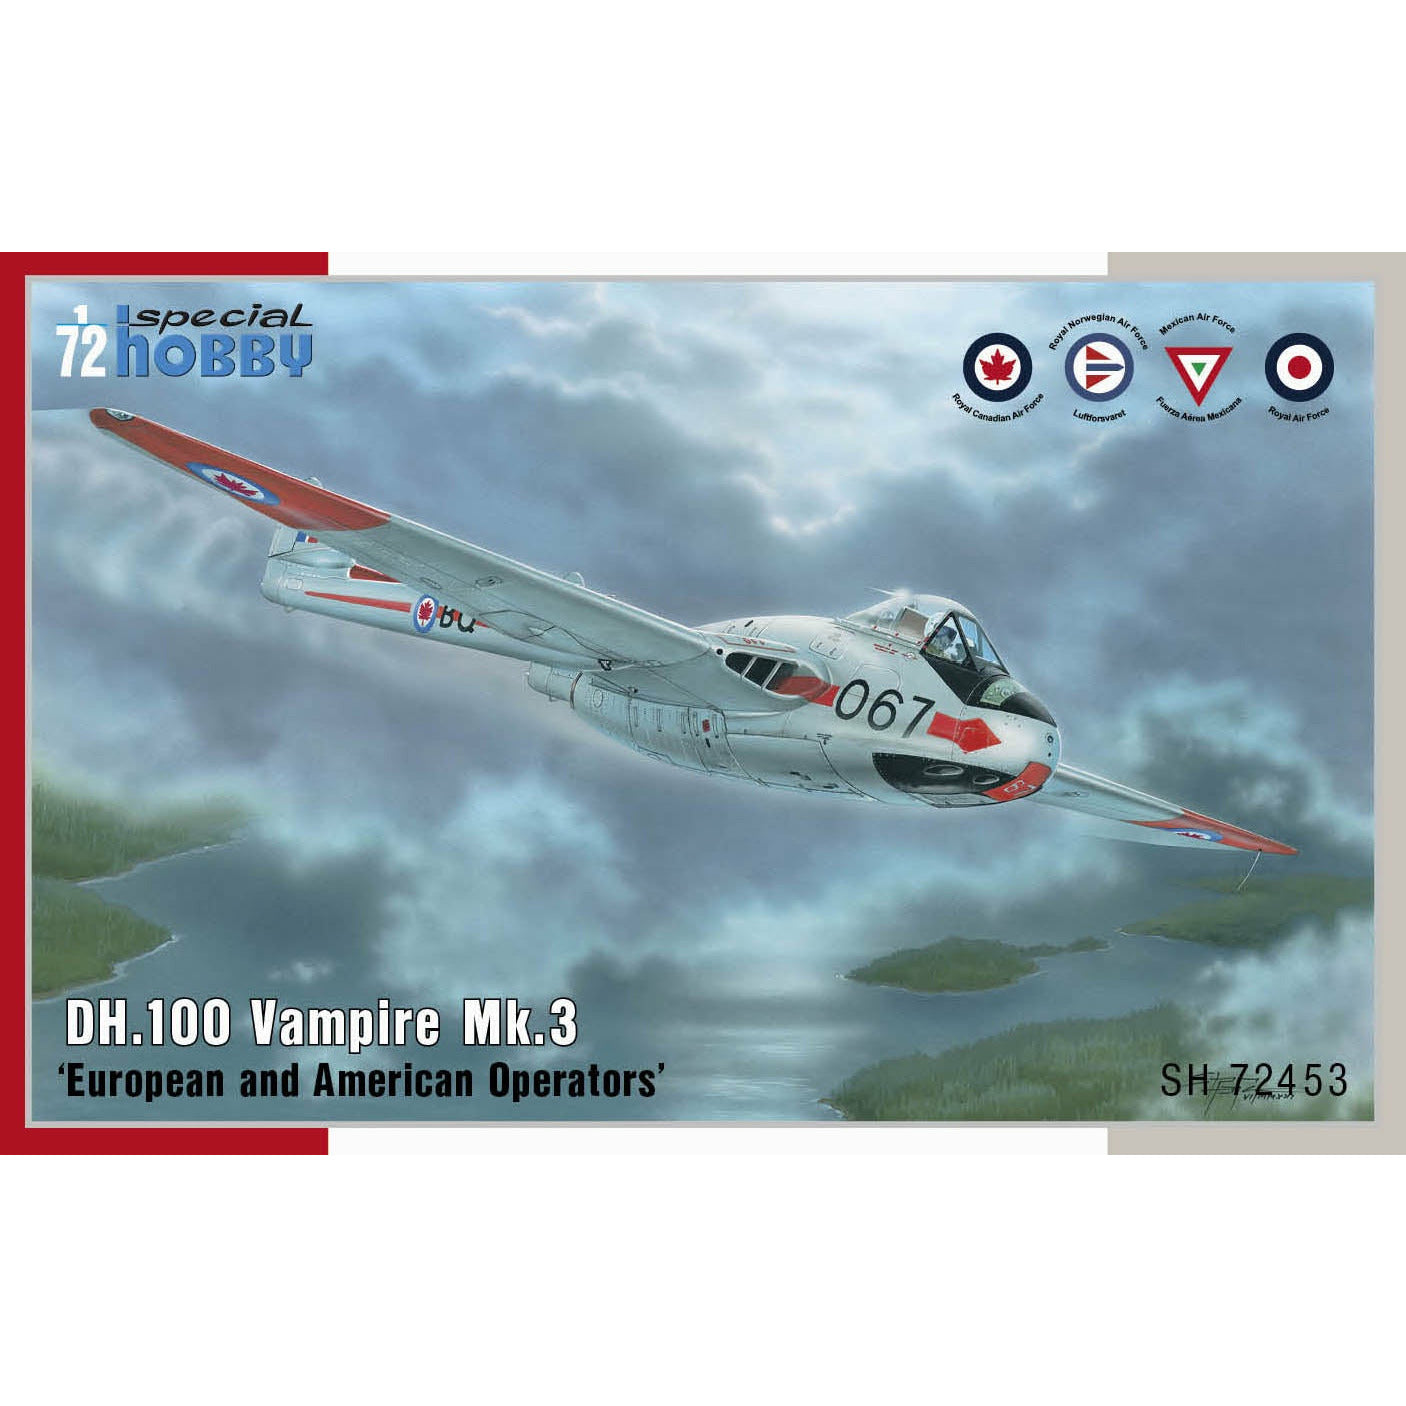 DH.100 Vampire Mk.3 'European and American Operators' 1/72 #72453 by Special Hobby